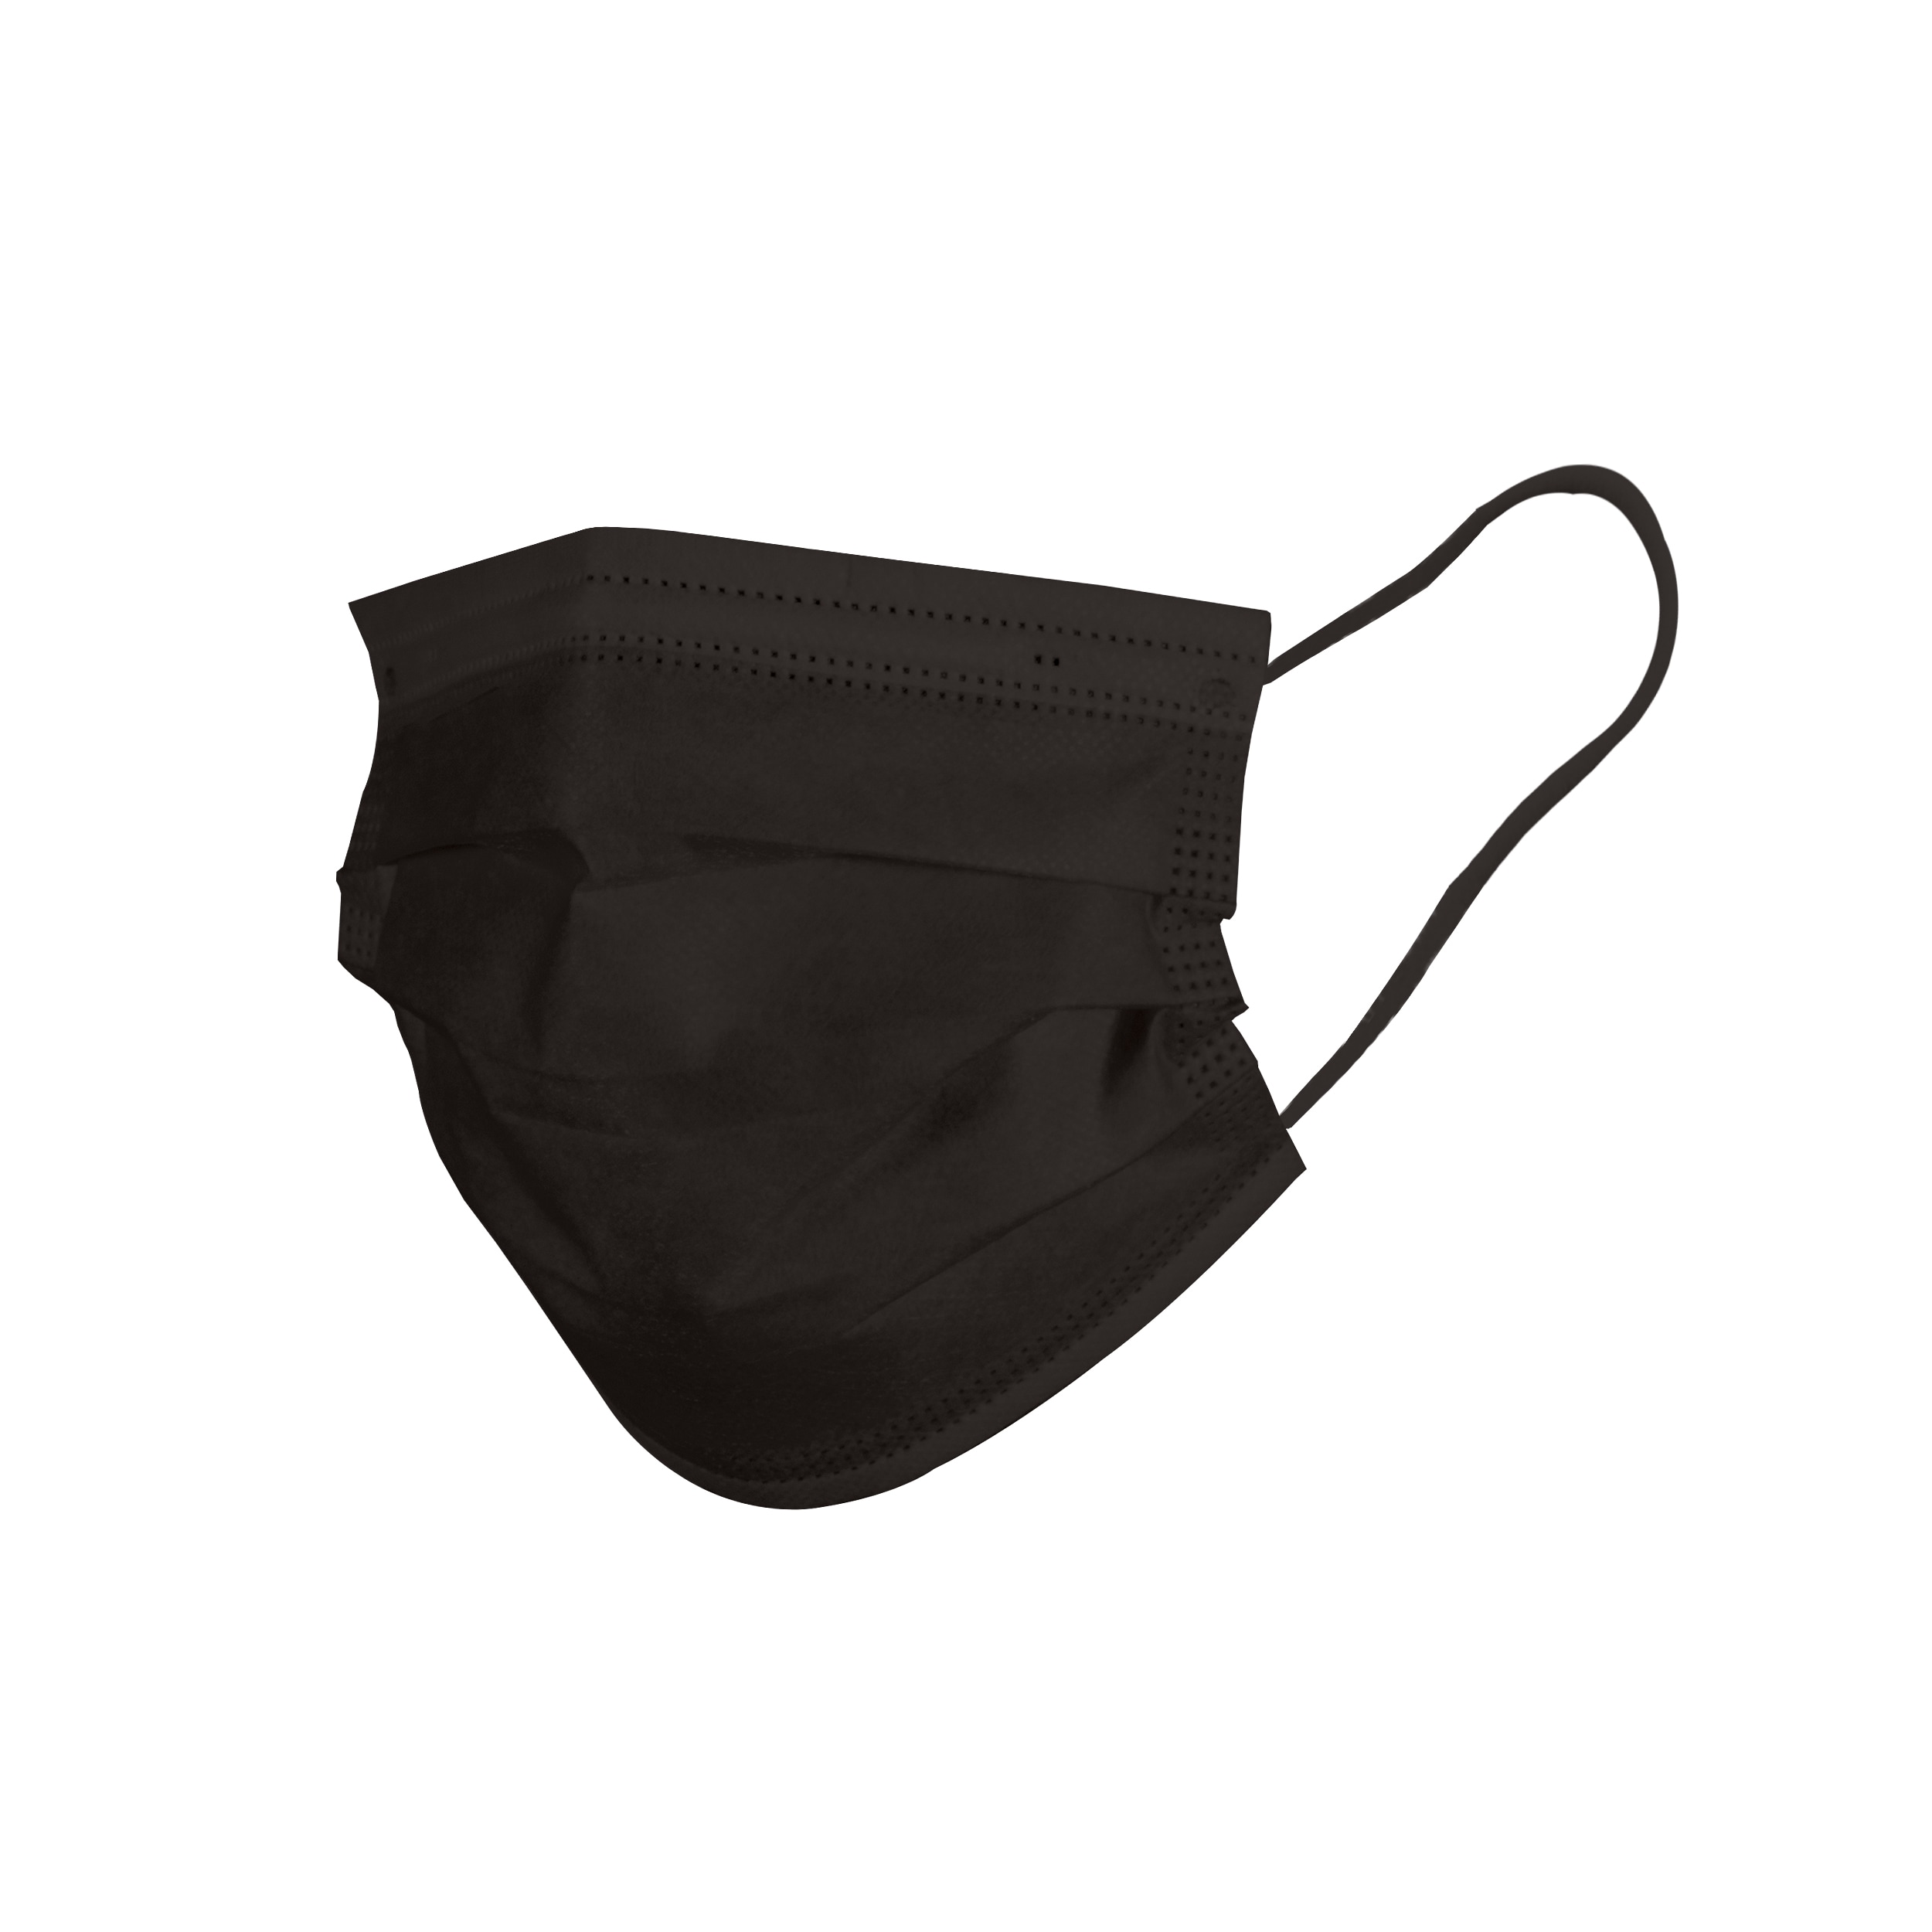 Face Masks with Secure Fit with Cooling Mesh Fabric - Black